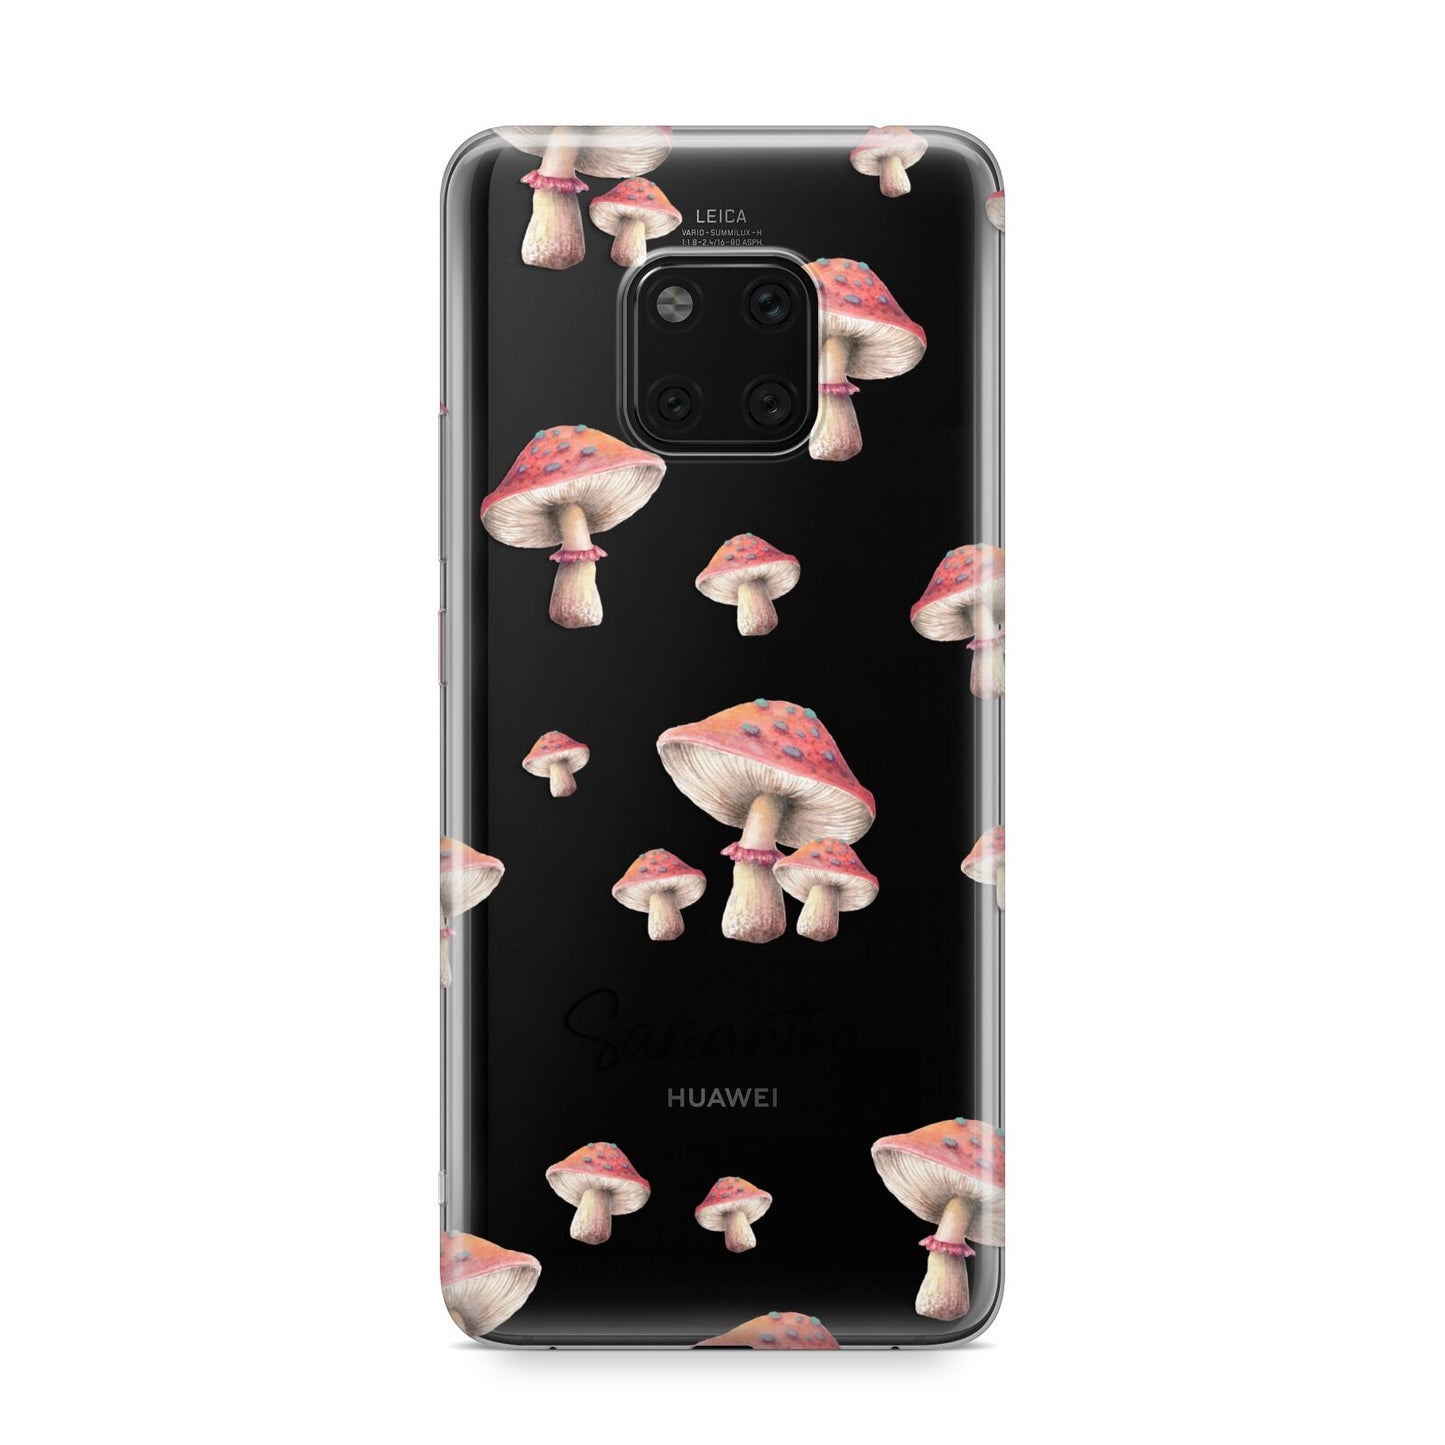 Mushroom Illustrations with Name Huawei Mate 20 Pro Phone Case